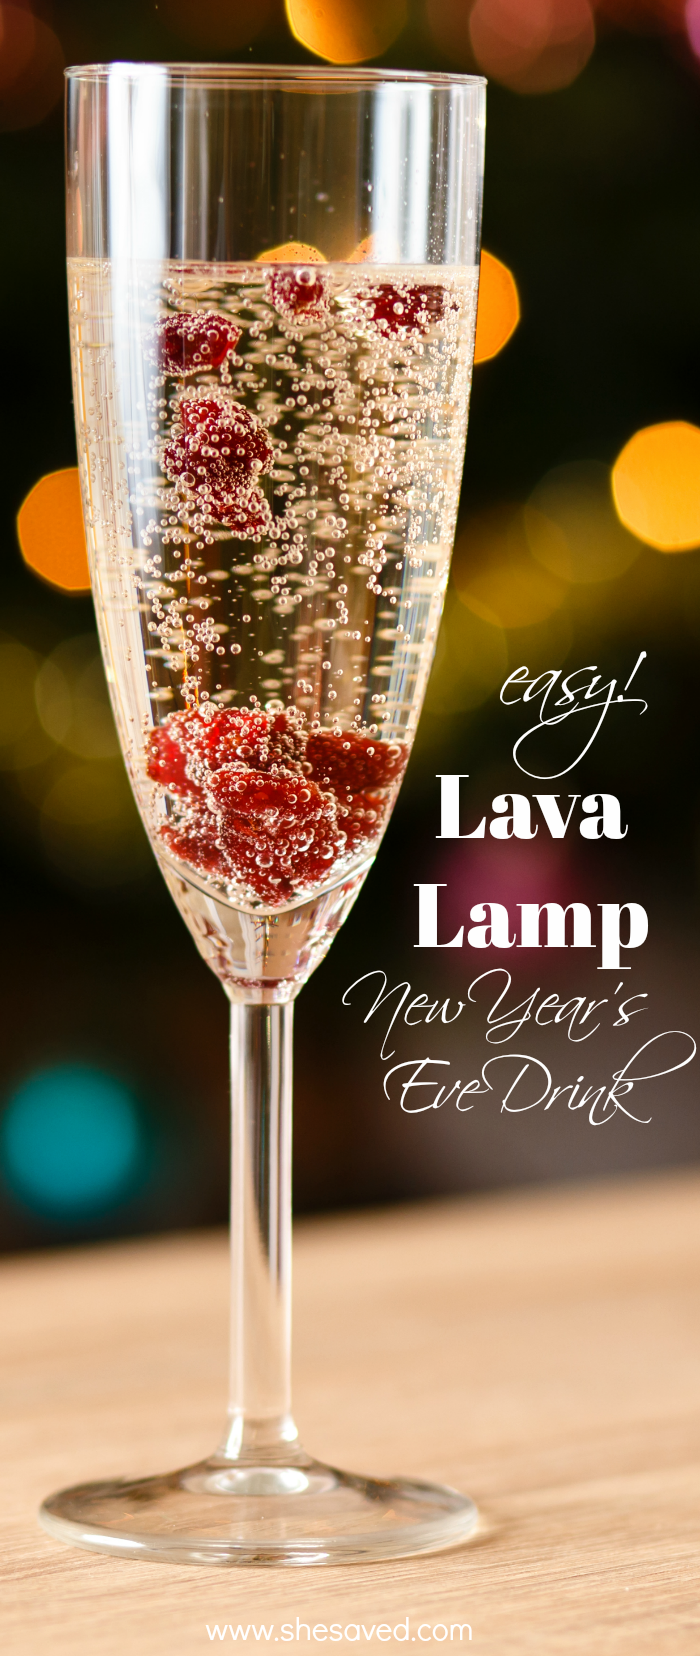 Lava Lamp Drink for New Year's Eve